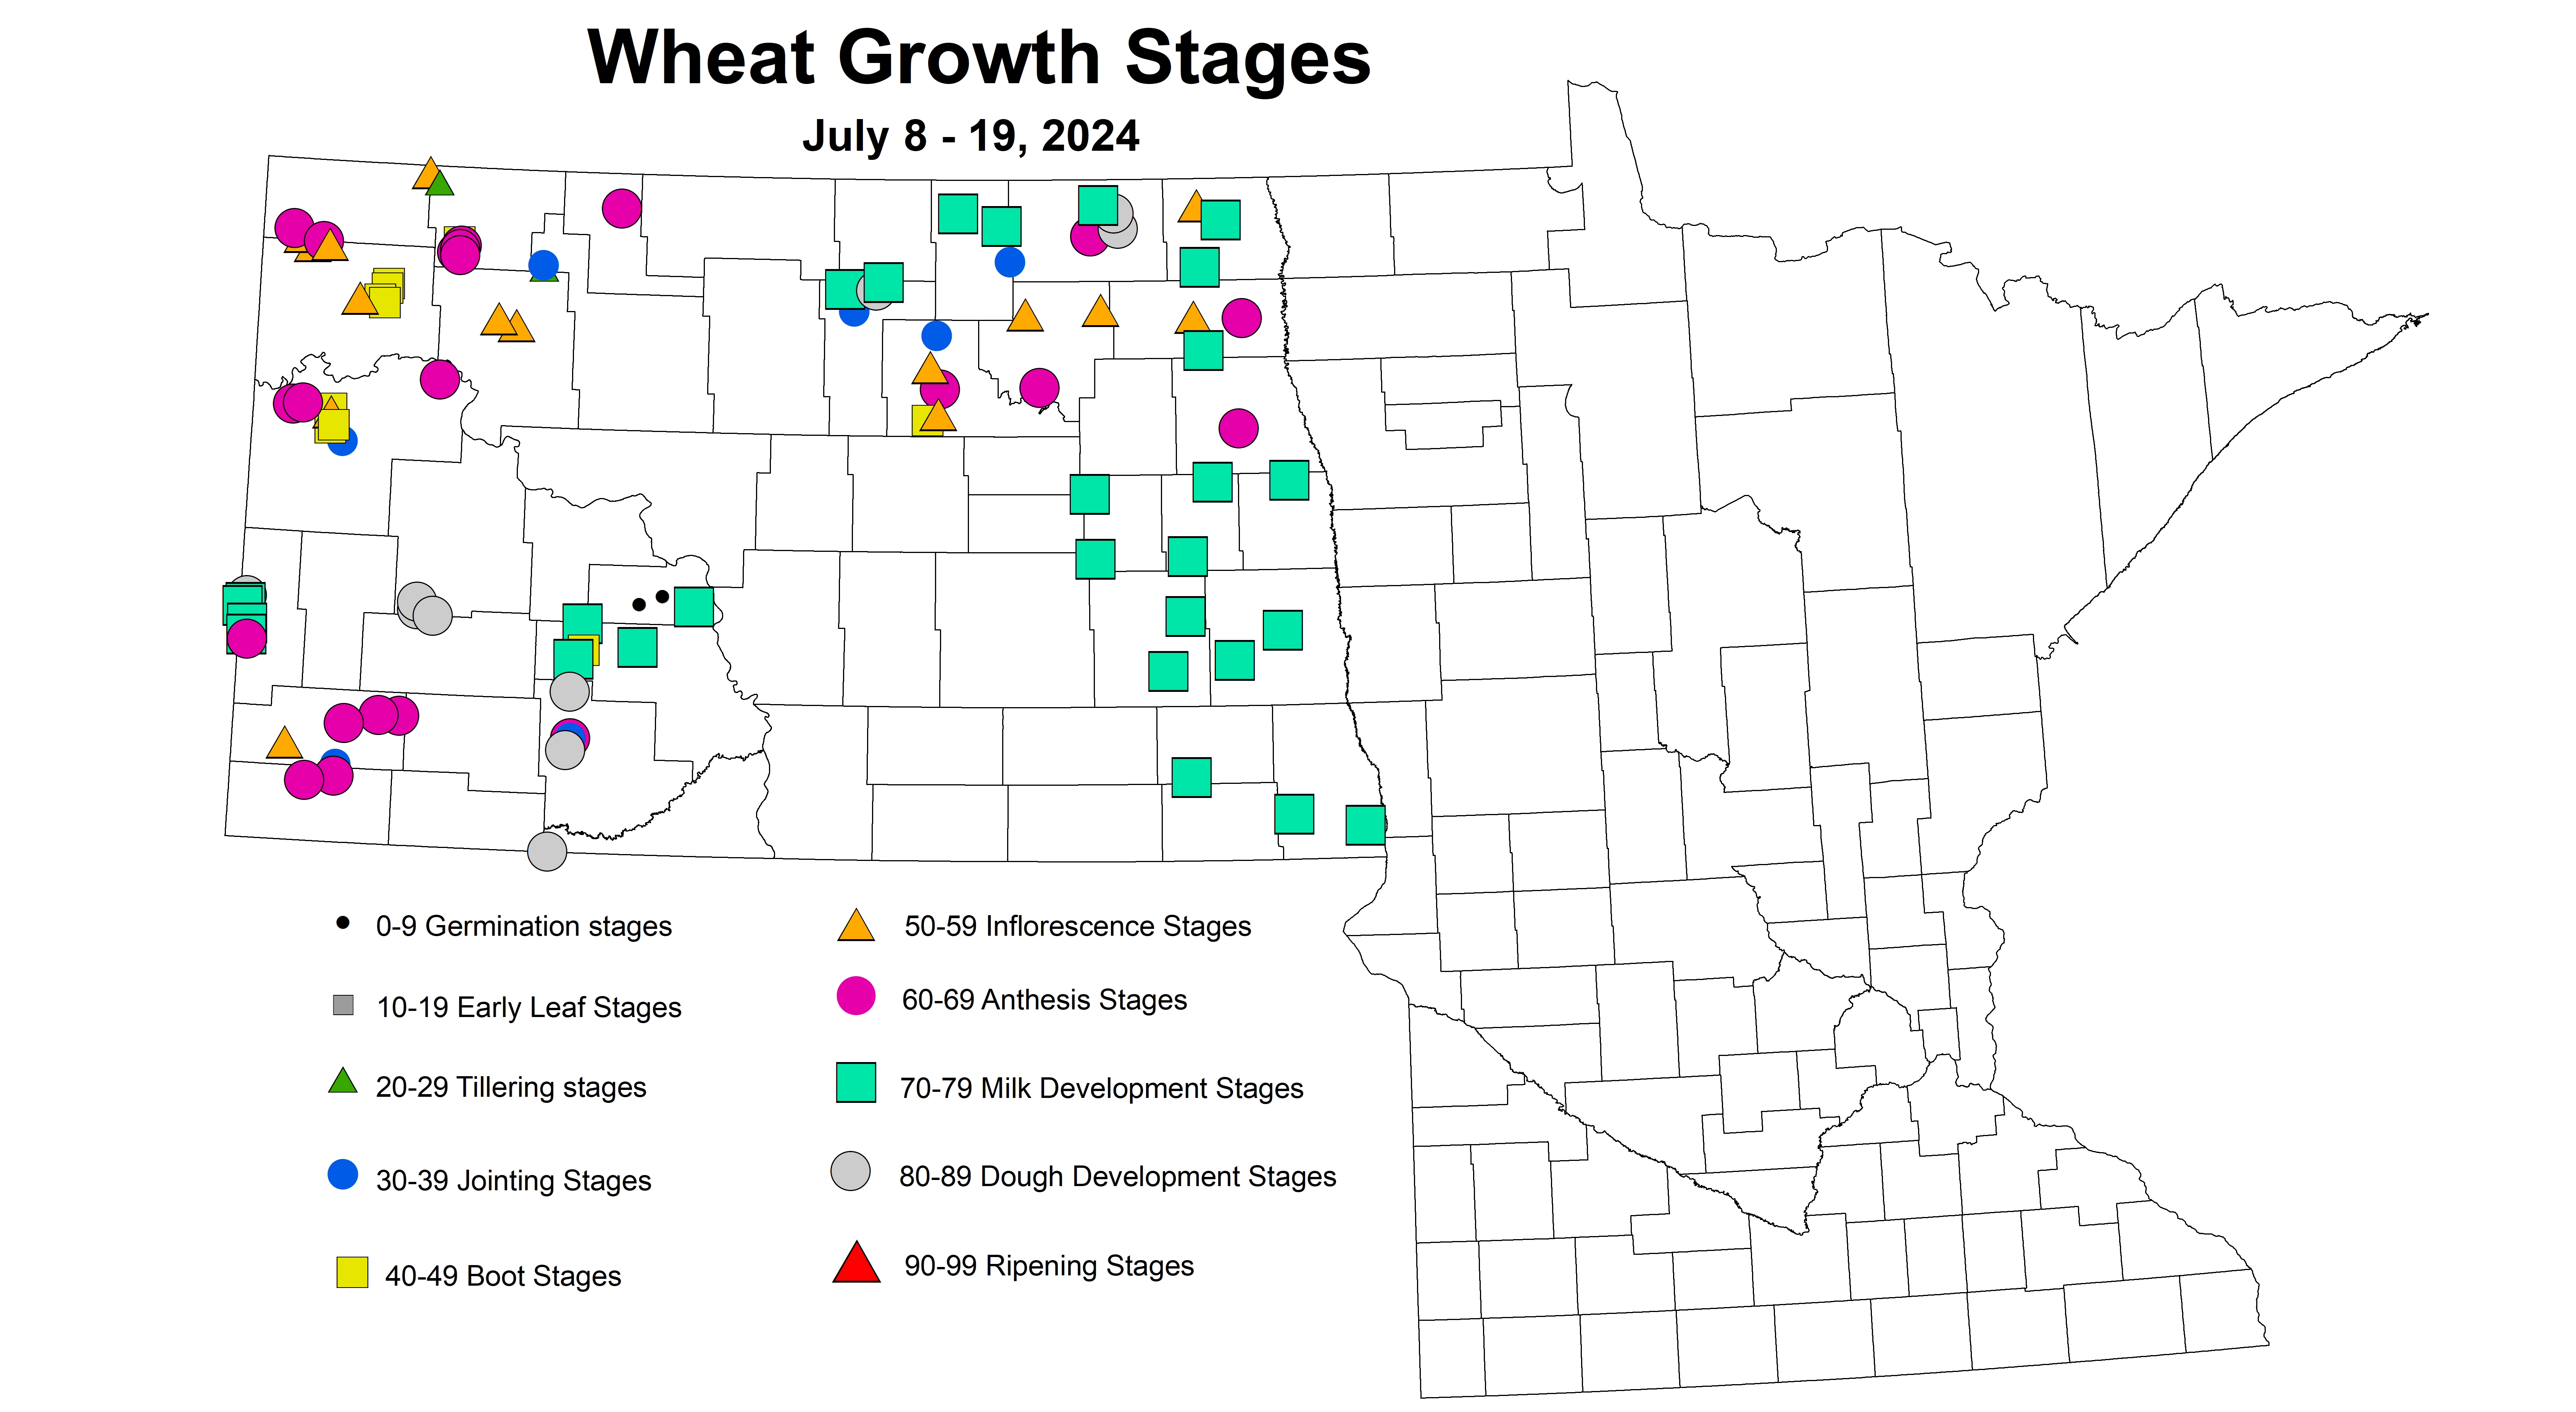 wheat growth stages 7.8-7.19 2024